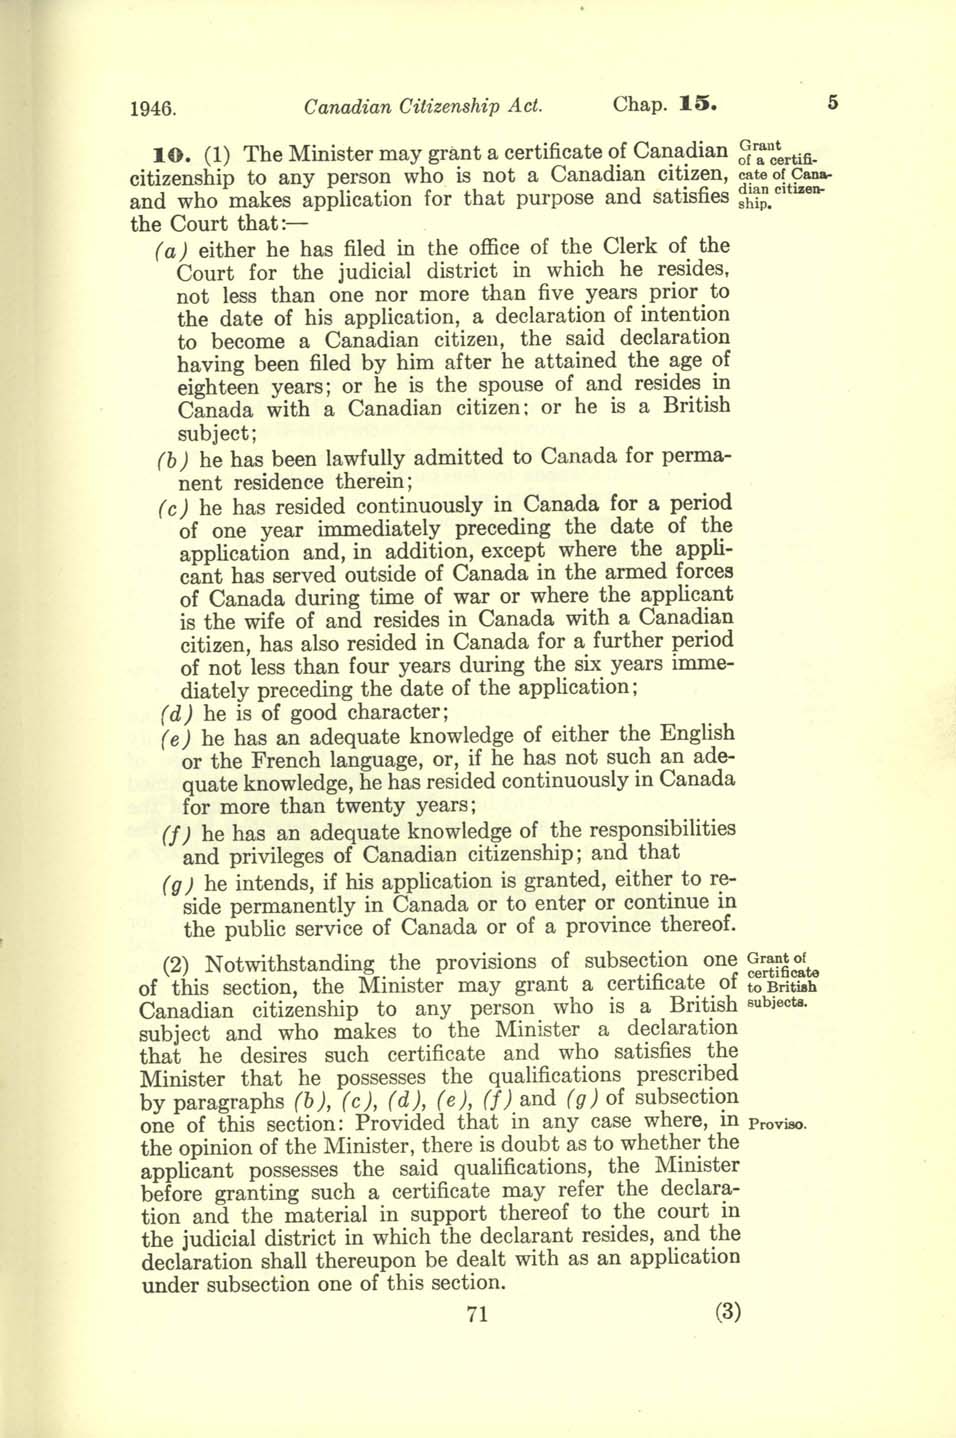 Chap 15 Page 71 Canadian Citizenship Act, 1947